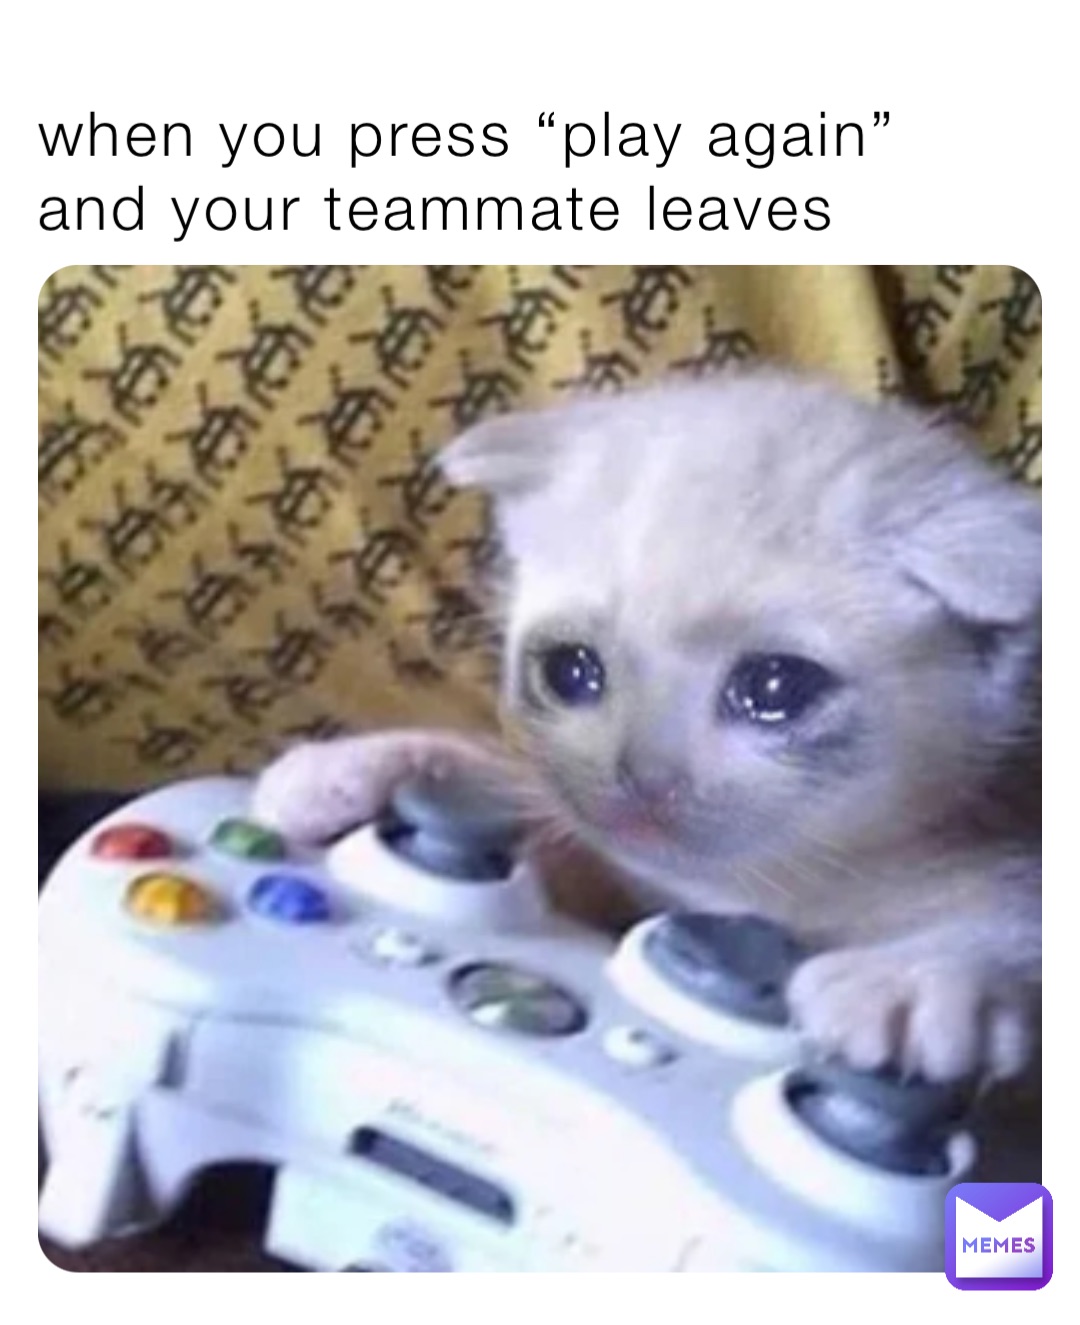 when you press “play again” and your teammate leaves